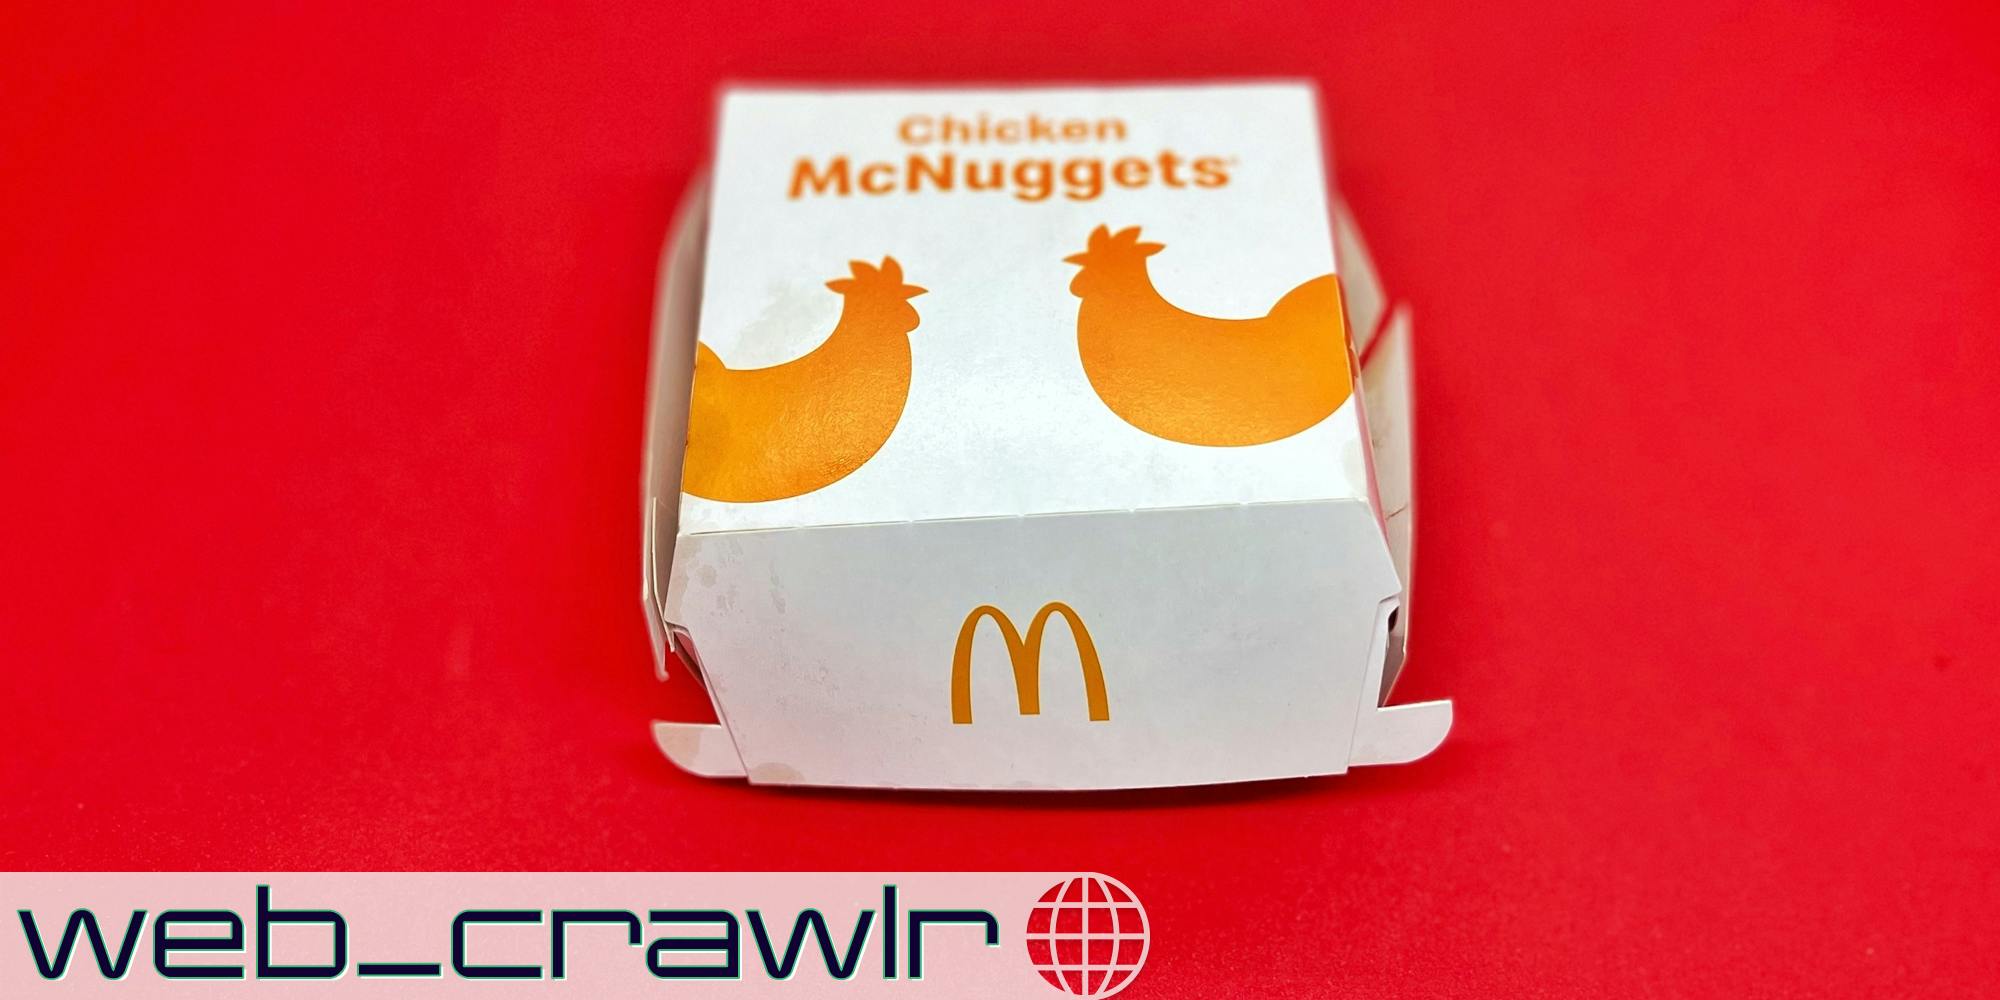 A McNuggets box on a red background. The Daily Dot newsletter web_crawlr logo is in the bottom left corner.